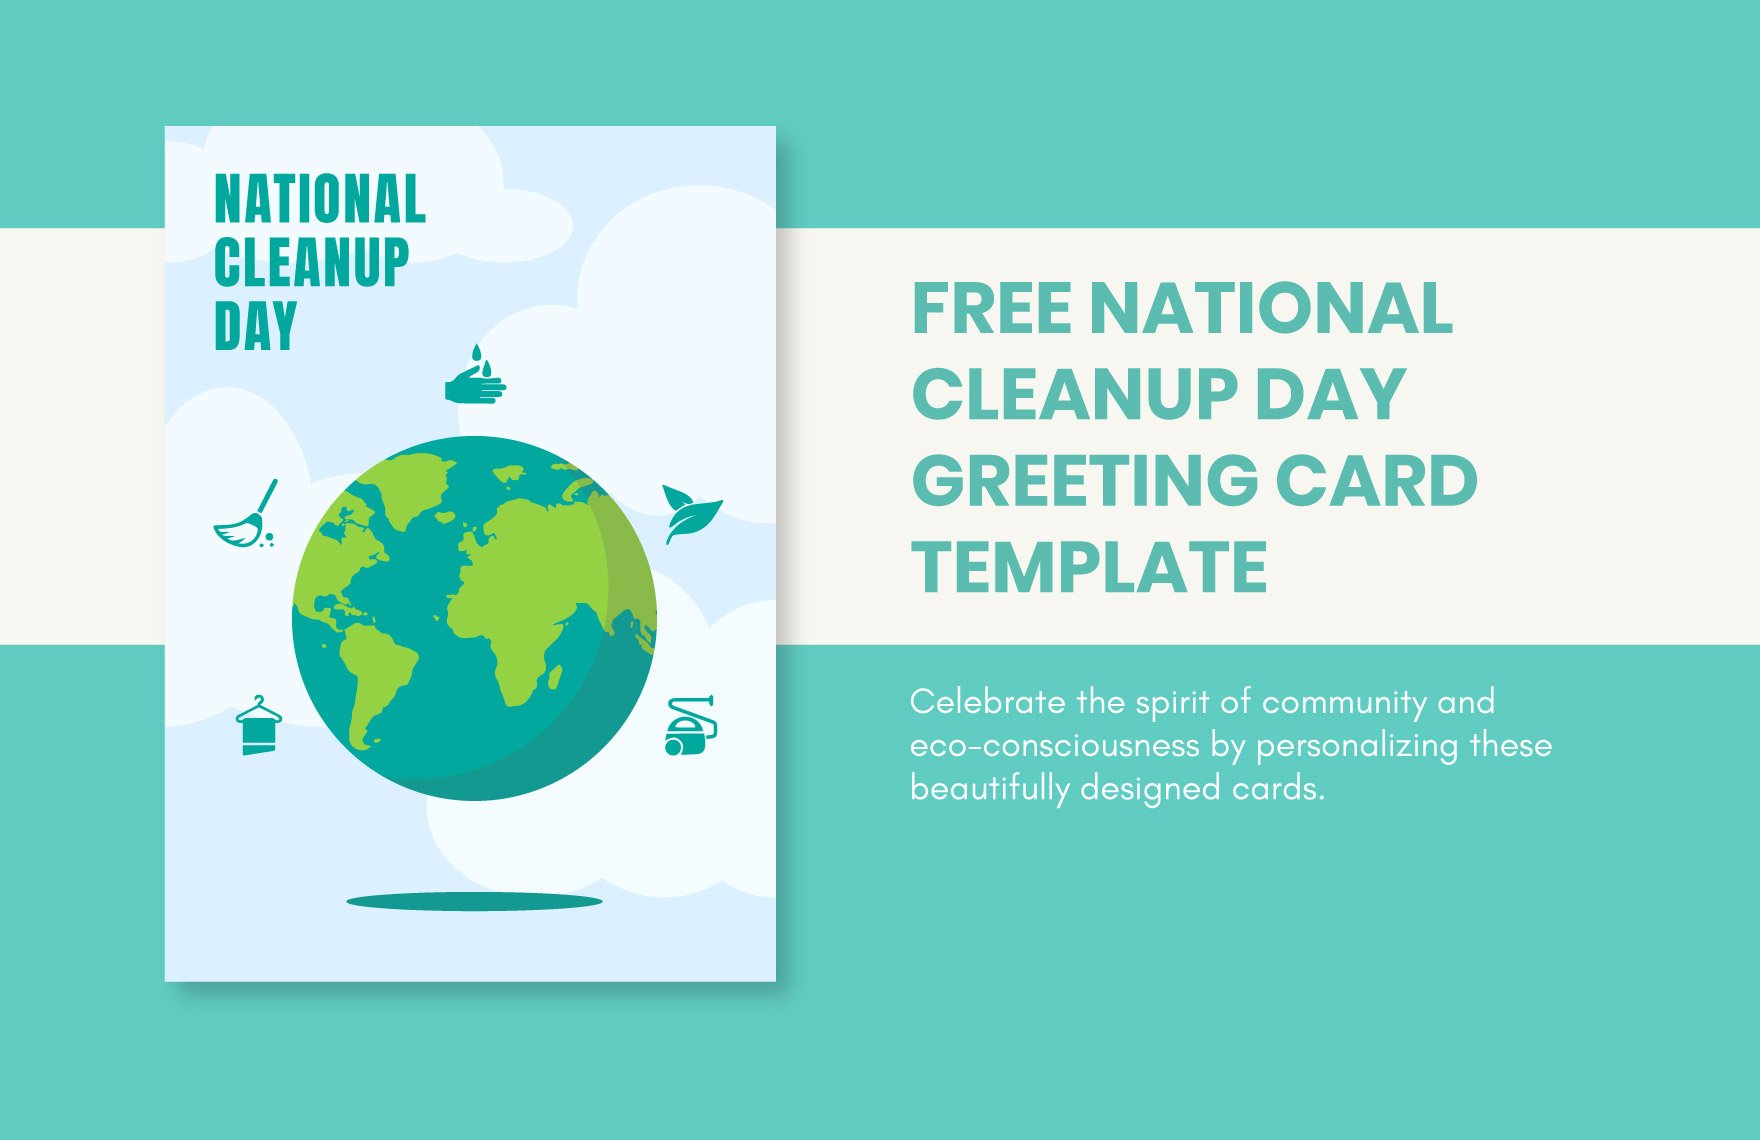 Free National CleanUp Day Greeting Card Template in Illustrator, PSD, PNG